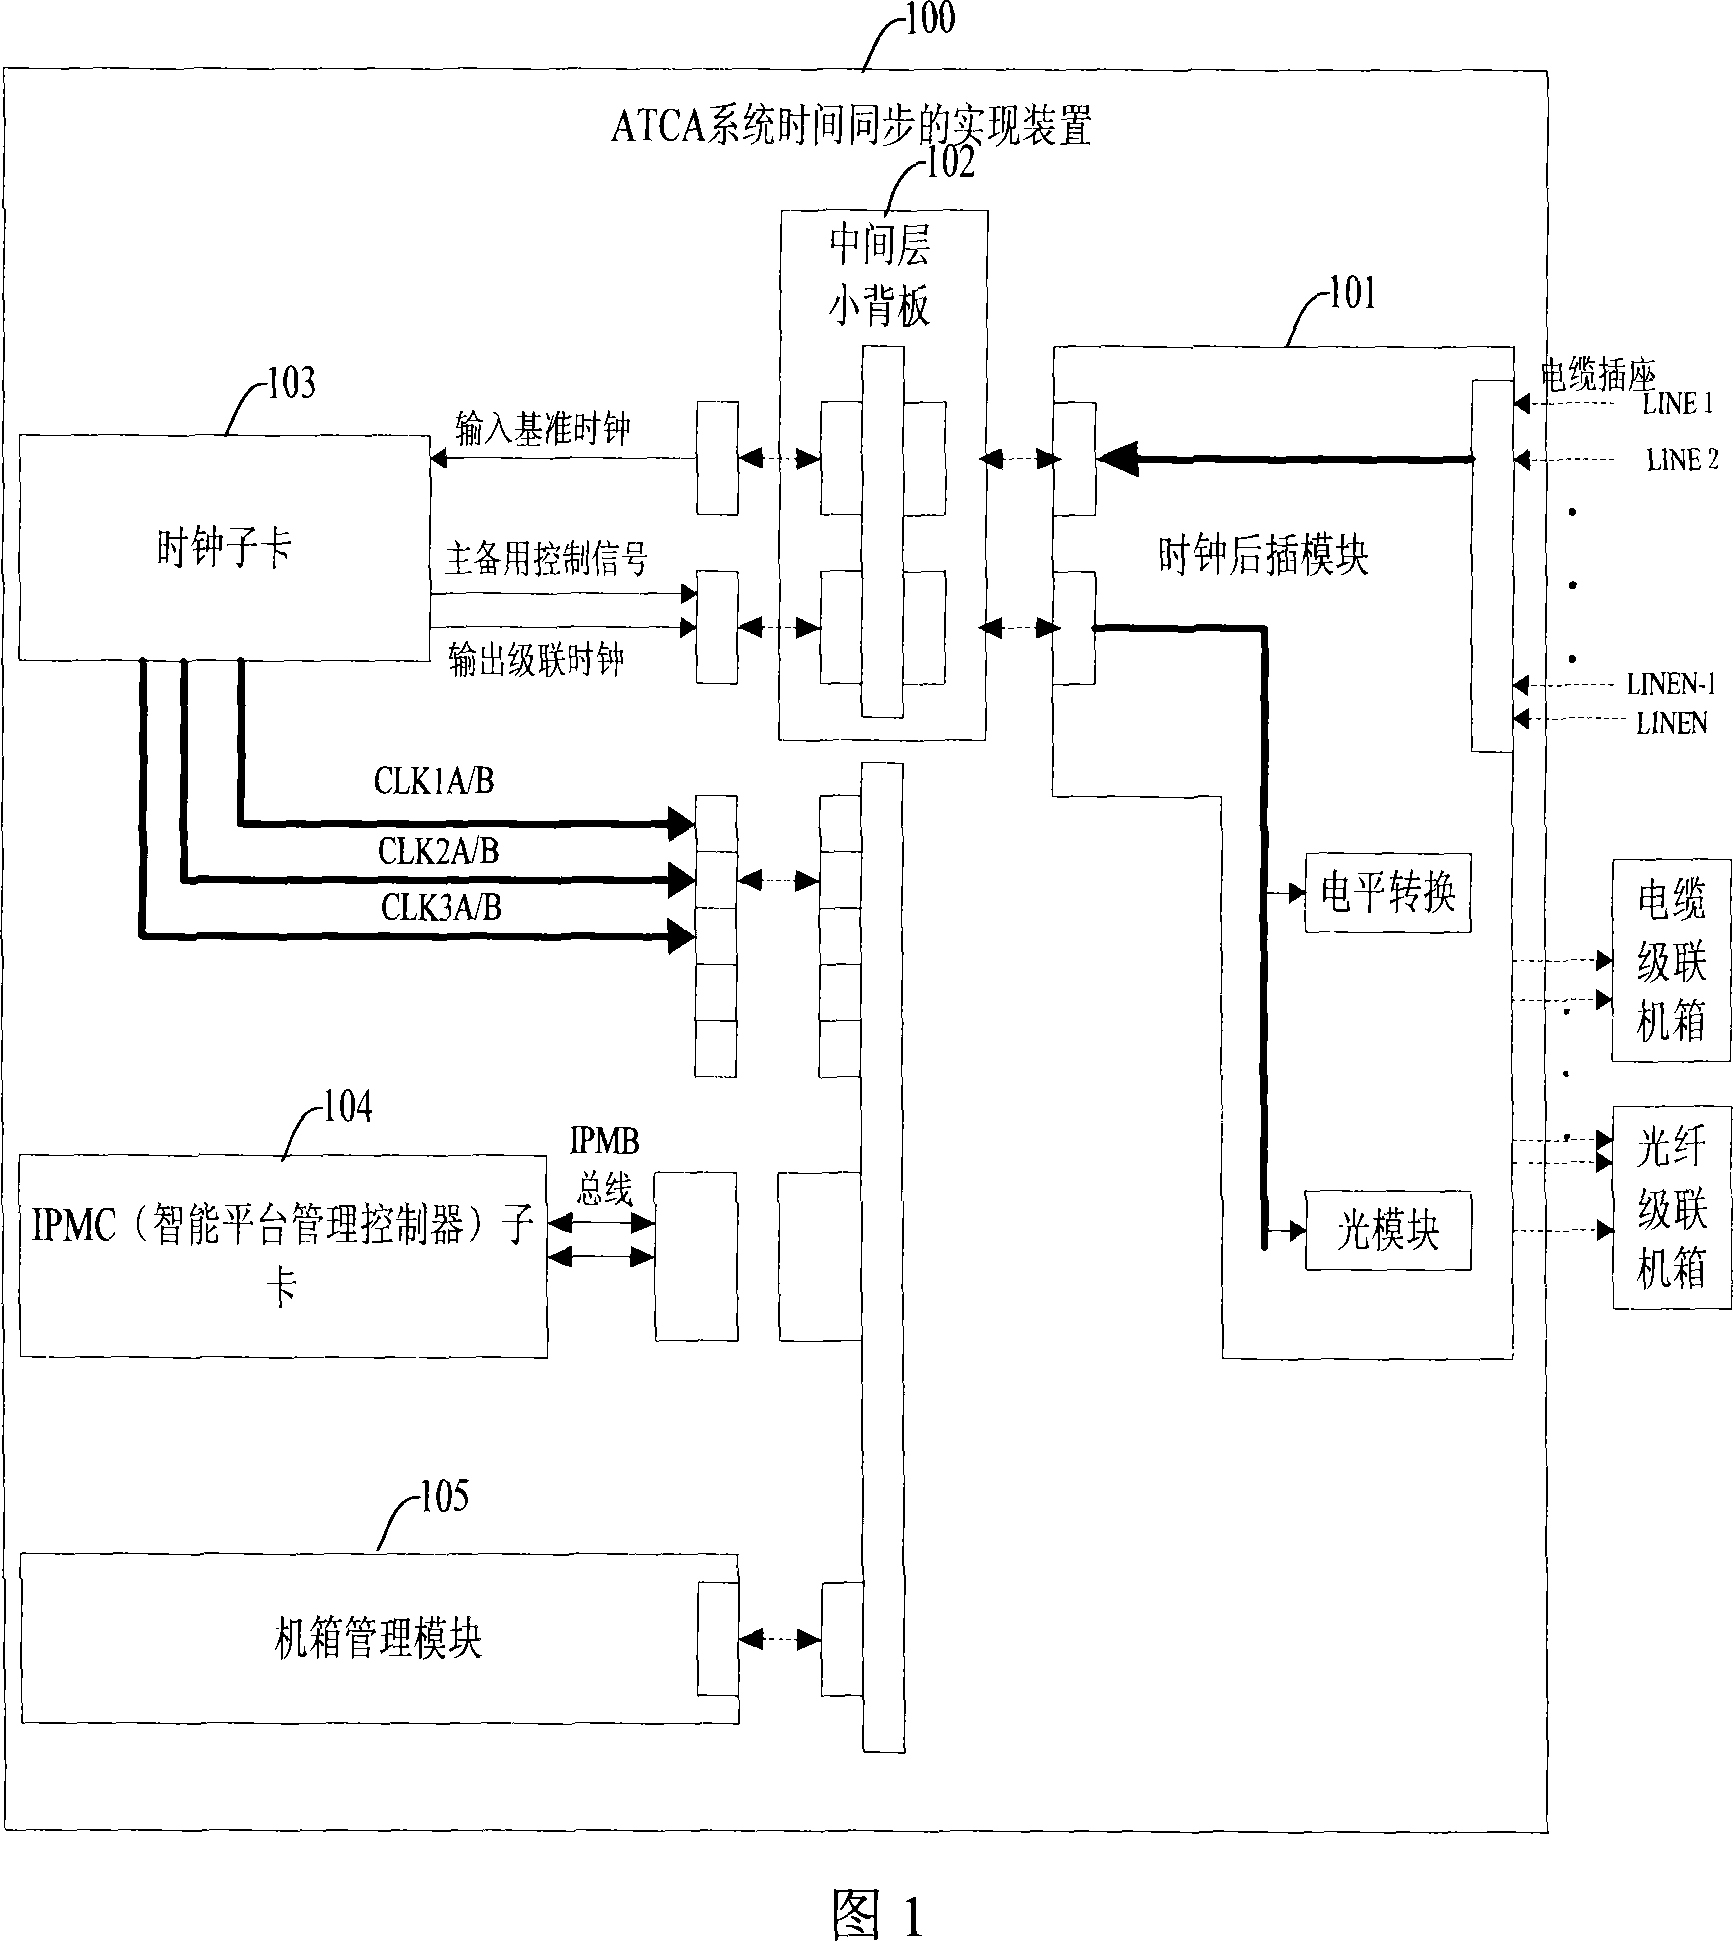 An implementation device and method for time synchronization of advanced telecom computer architecture